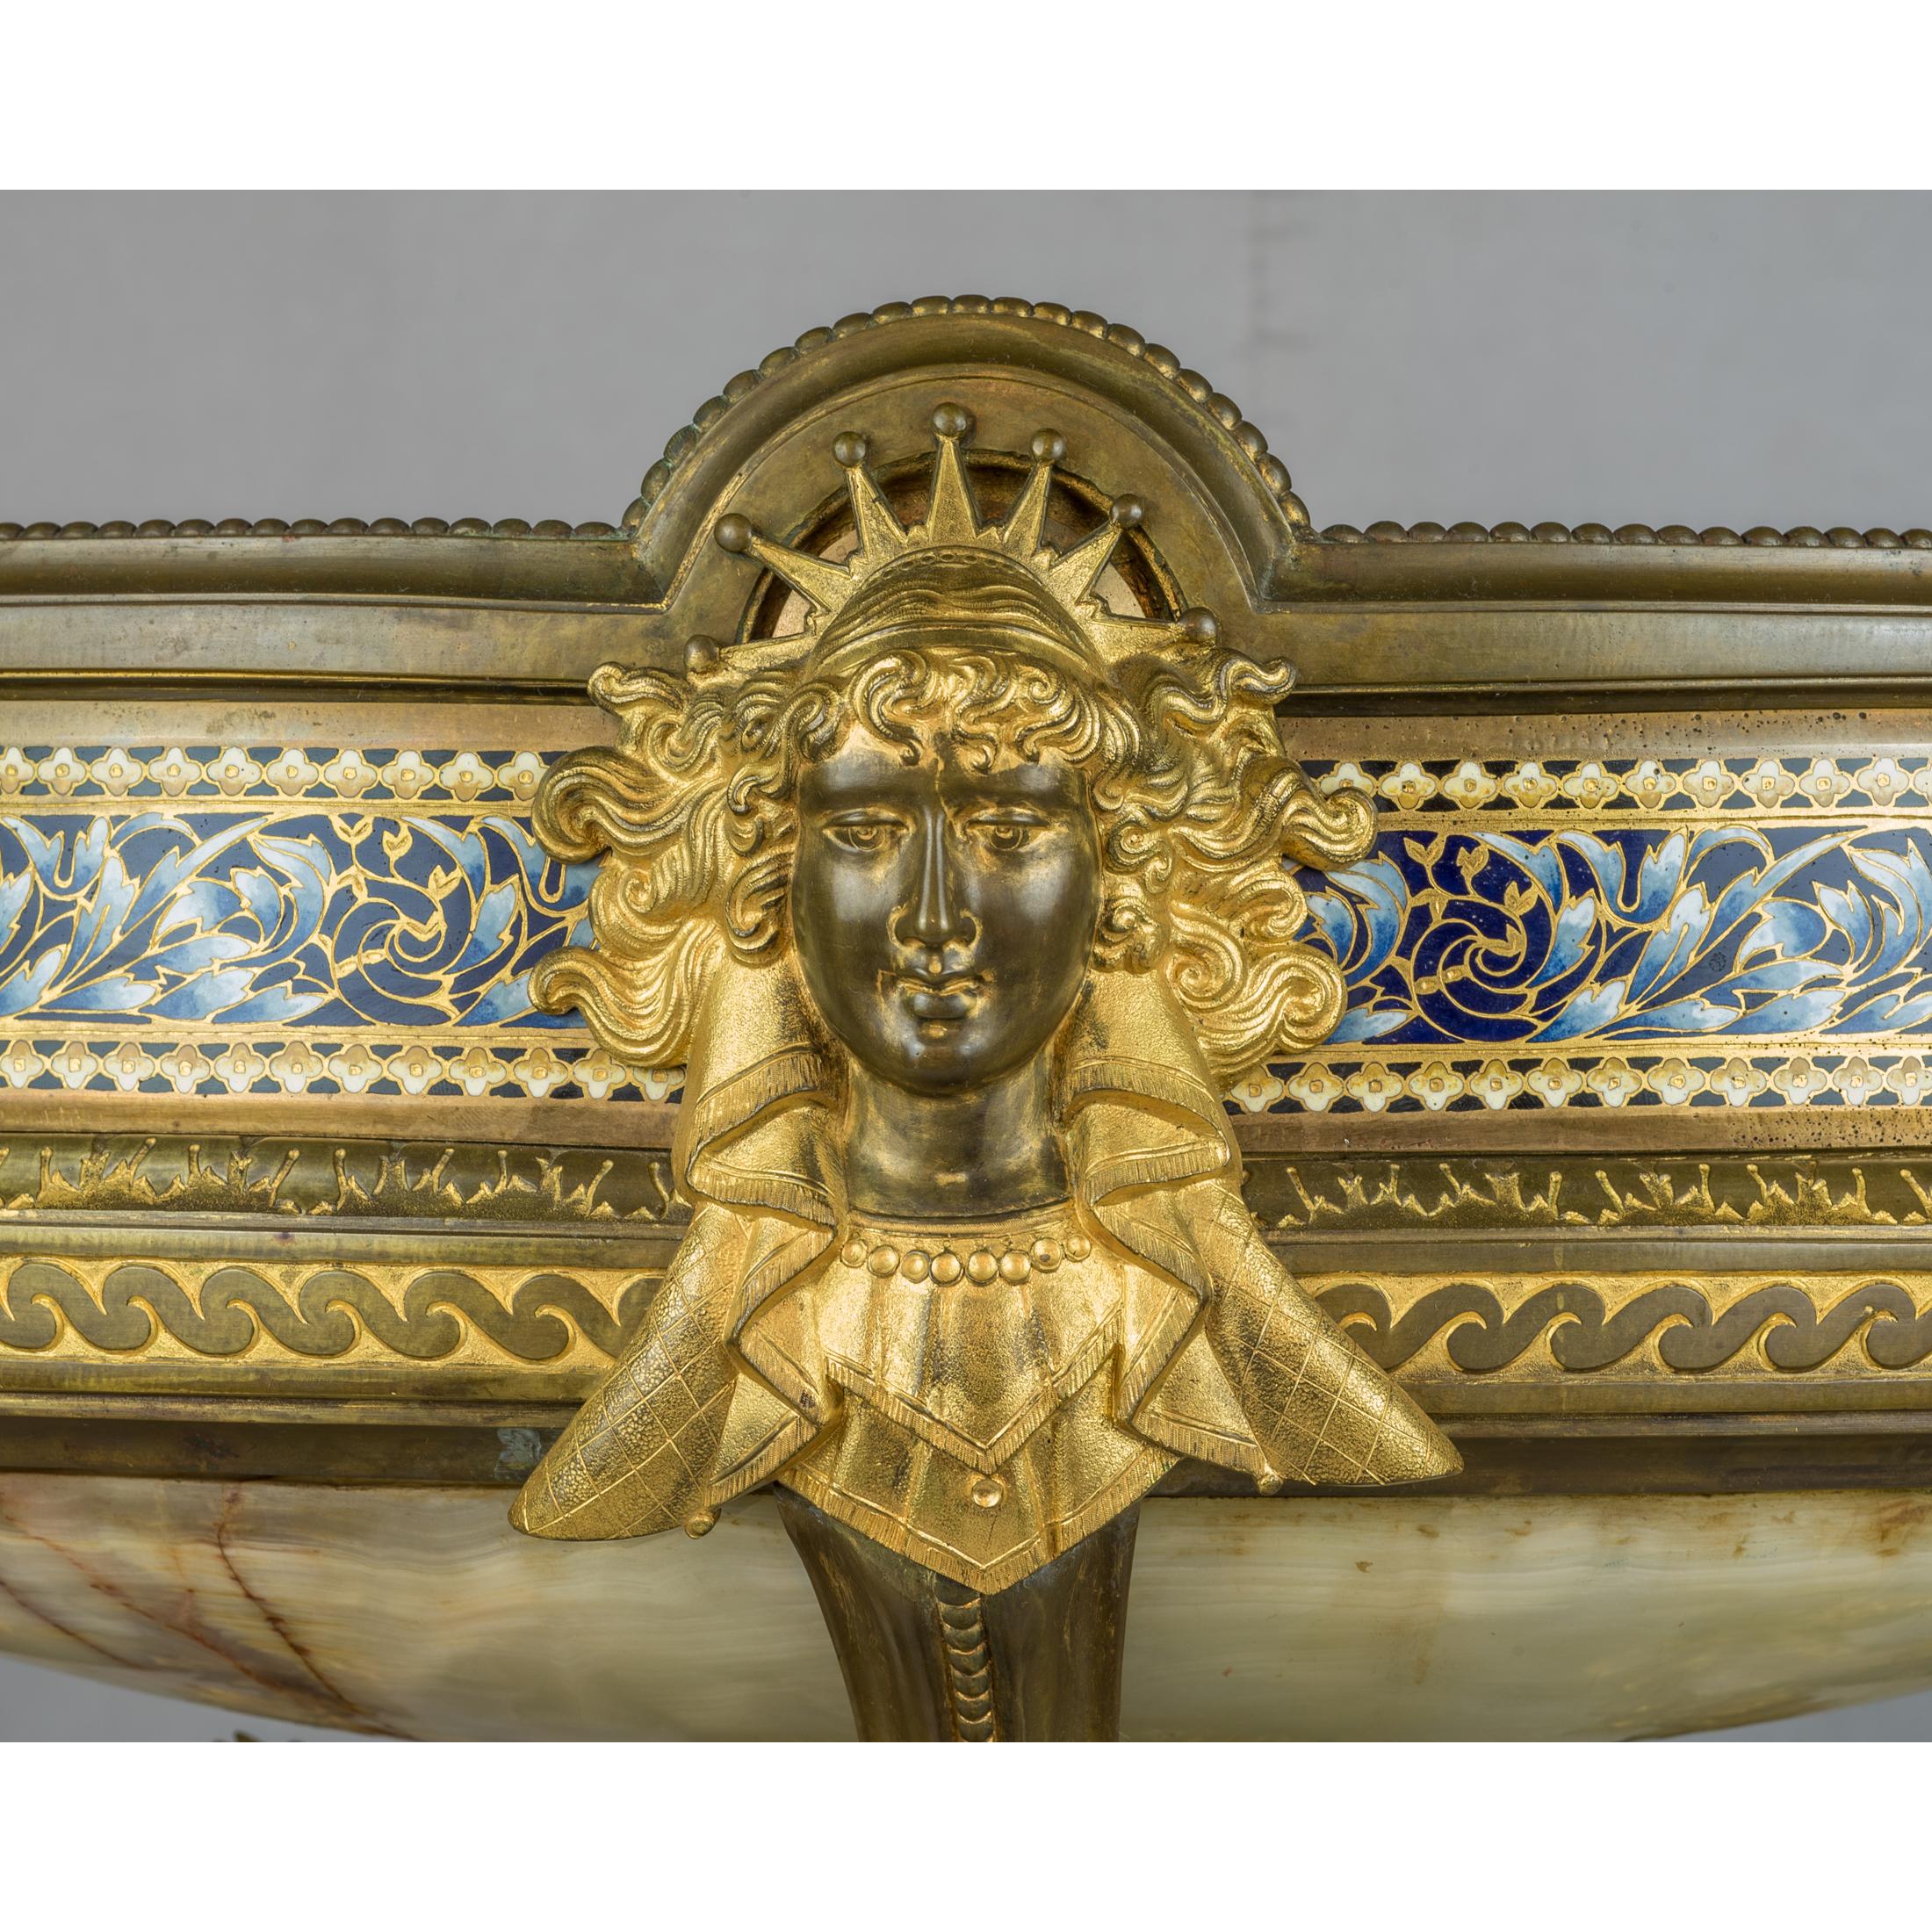 A Renaissance Revival Onyx and Champlevé Planter with Cloisonné Enamel Urns In Good Condition For Sale In New York, NY